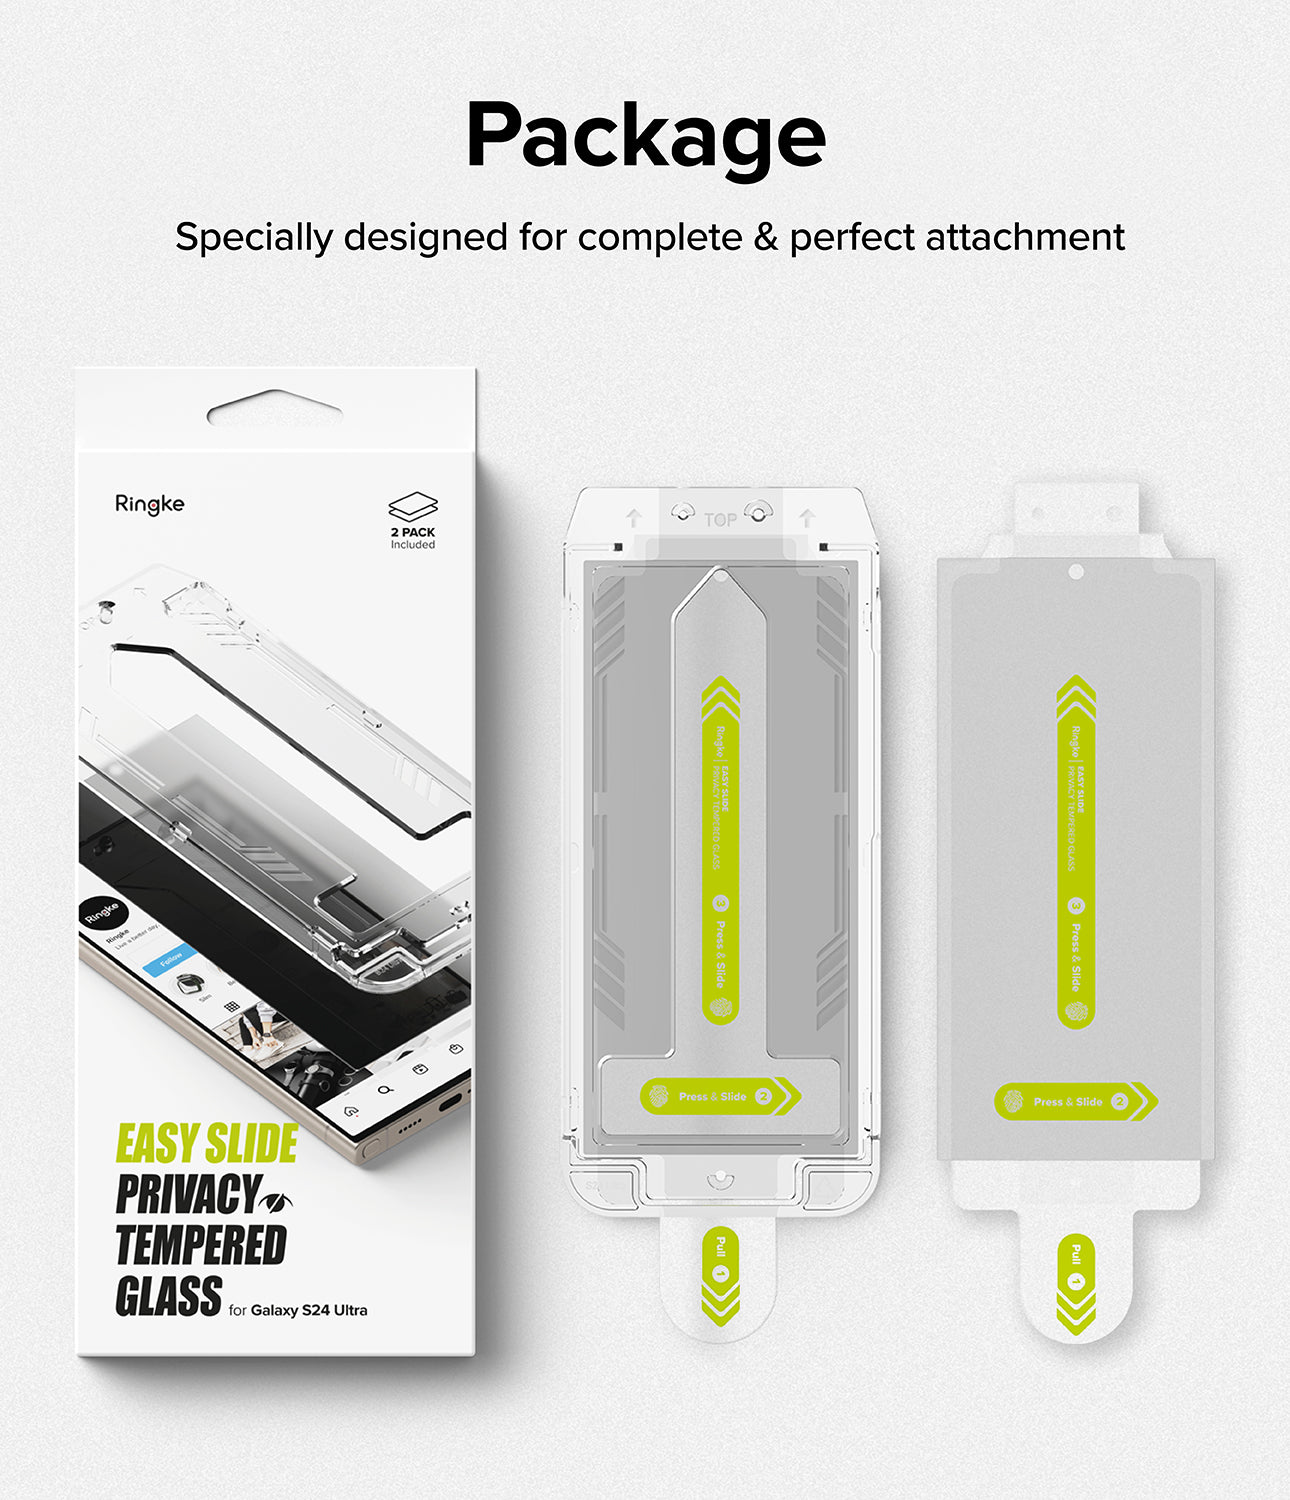 Galaxy S24 Ultra Screen Protector | Easy Slide Privacy Tempered Glass - Package.